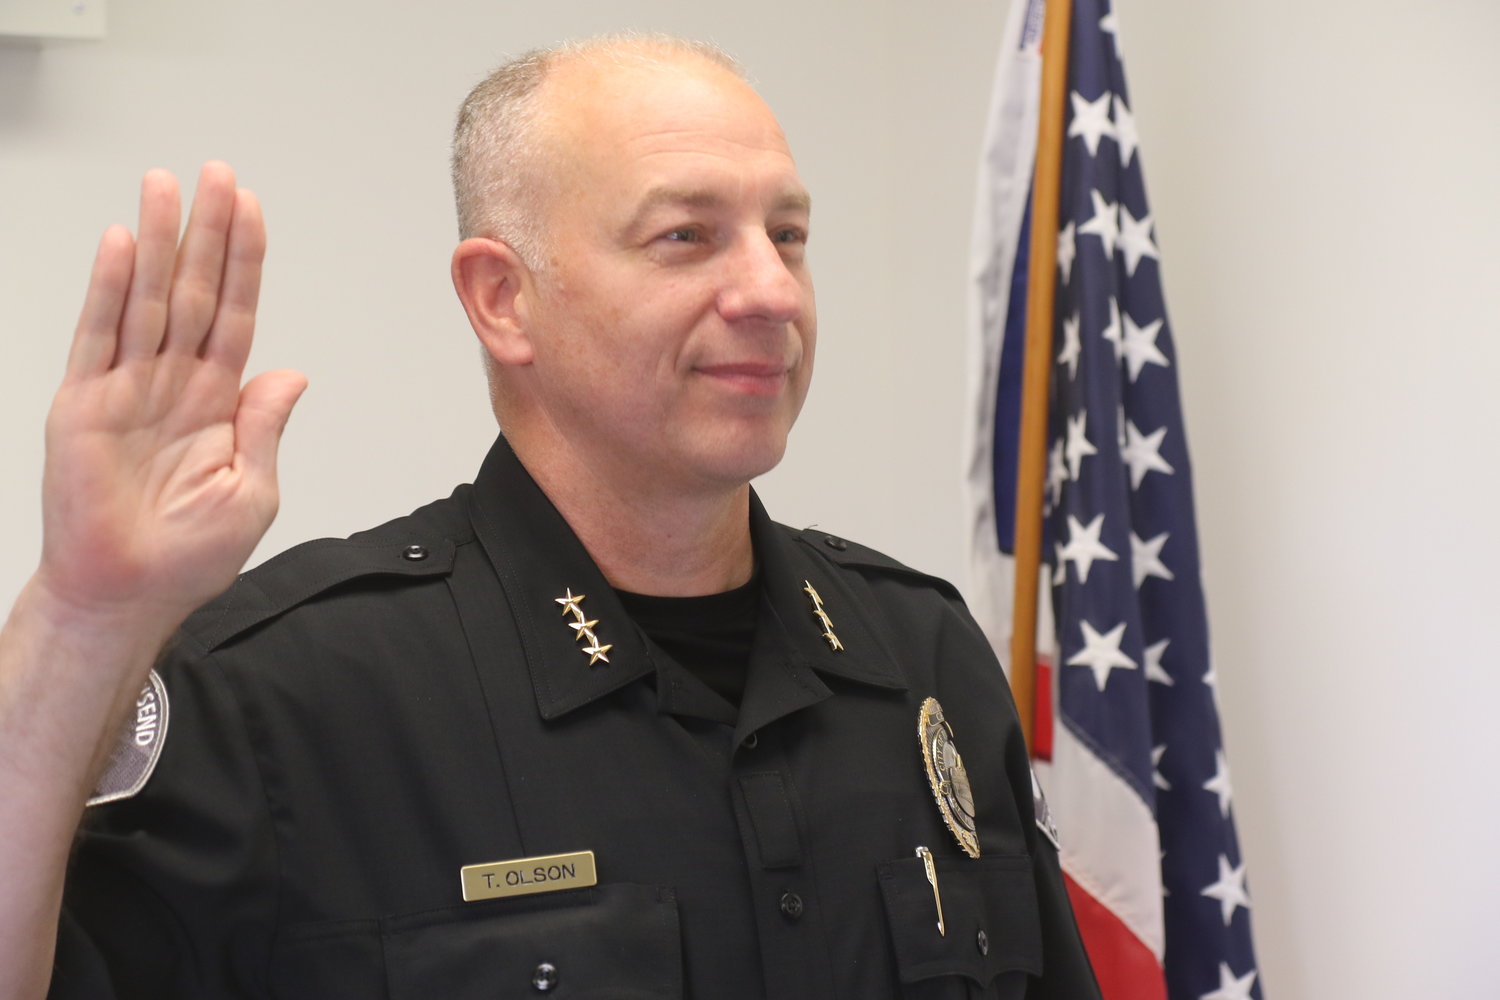 Port Townsend’s new chief of police, Thomas Olson, was sworn-in Monday.